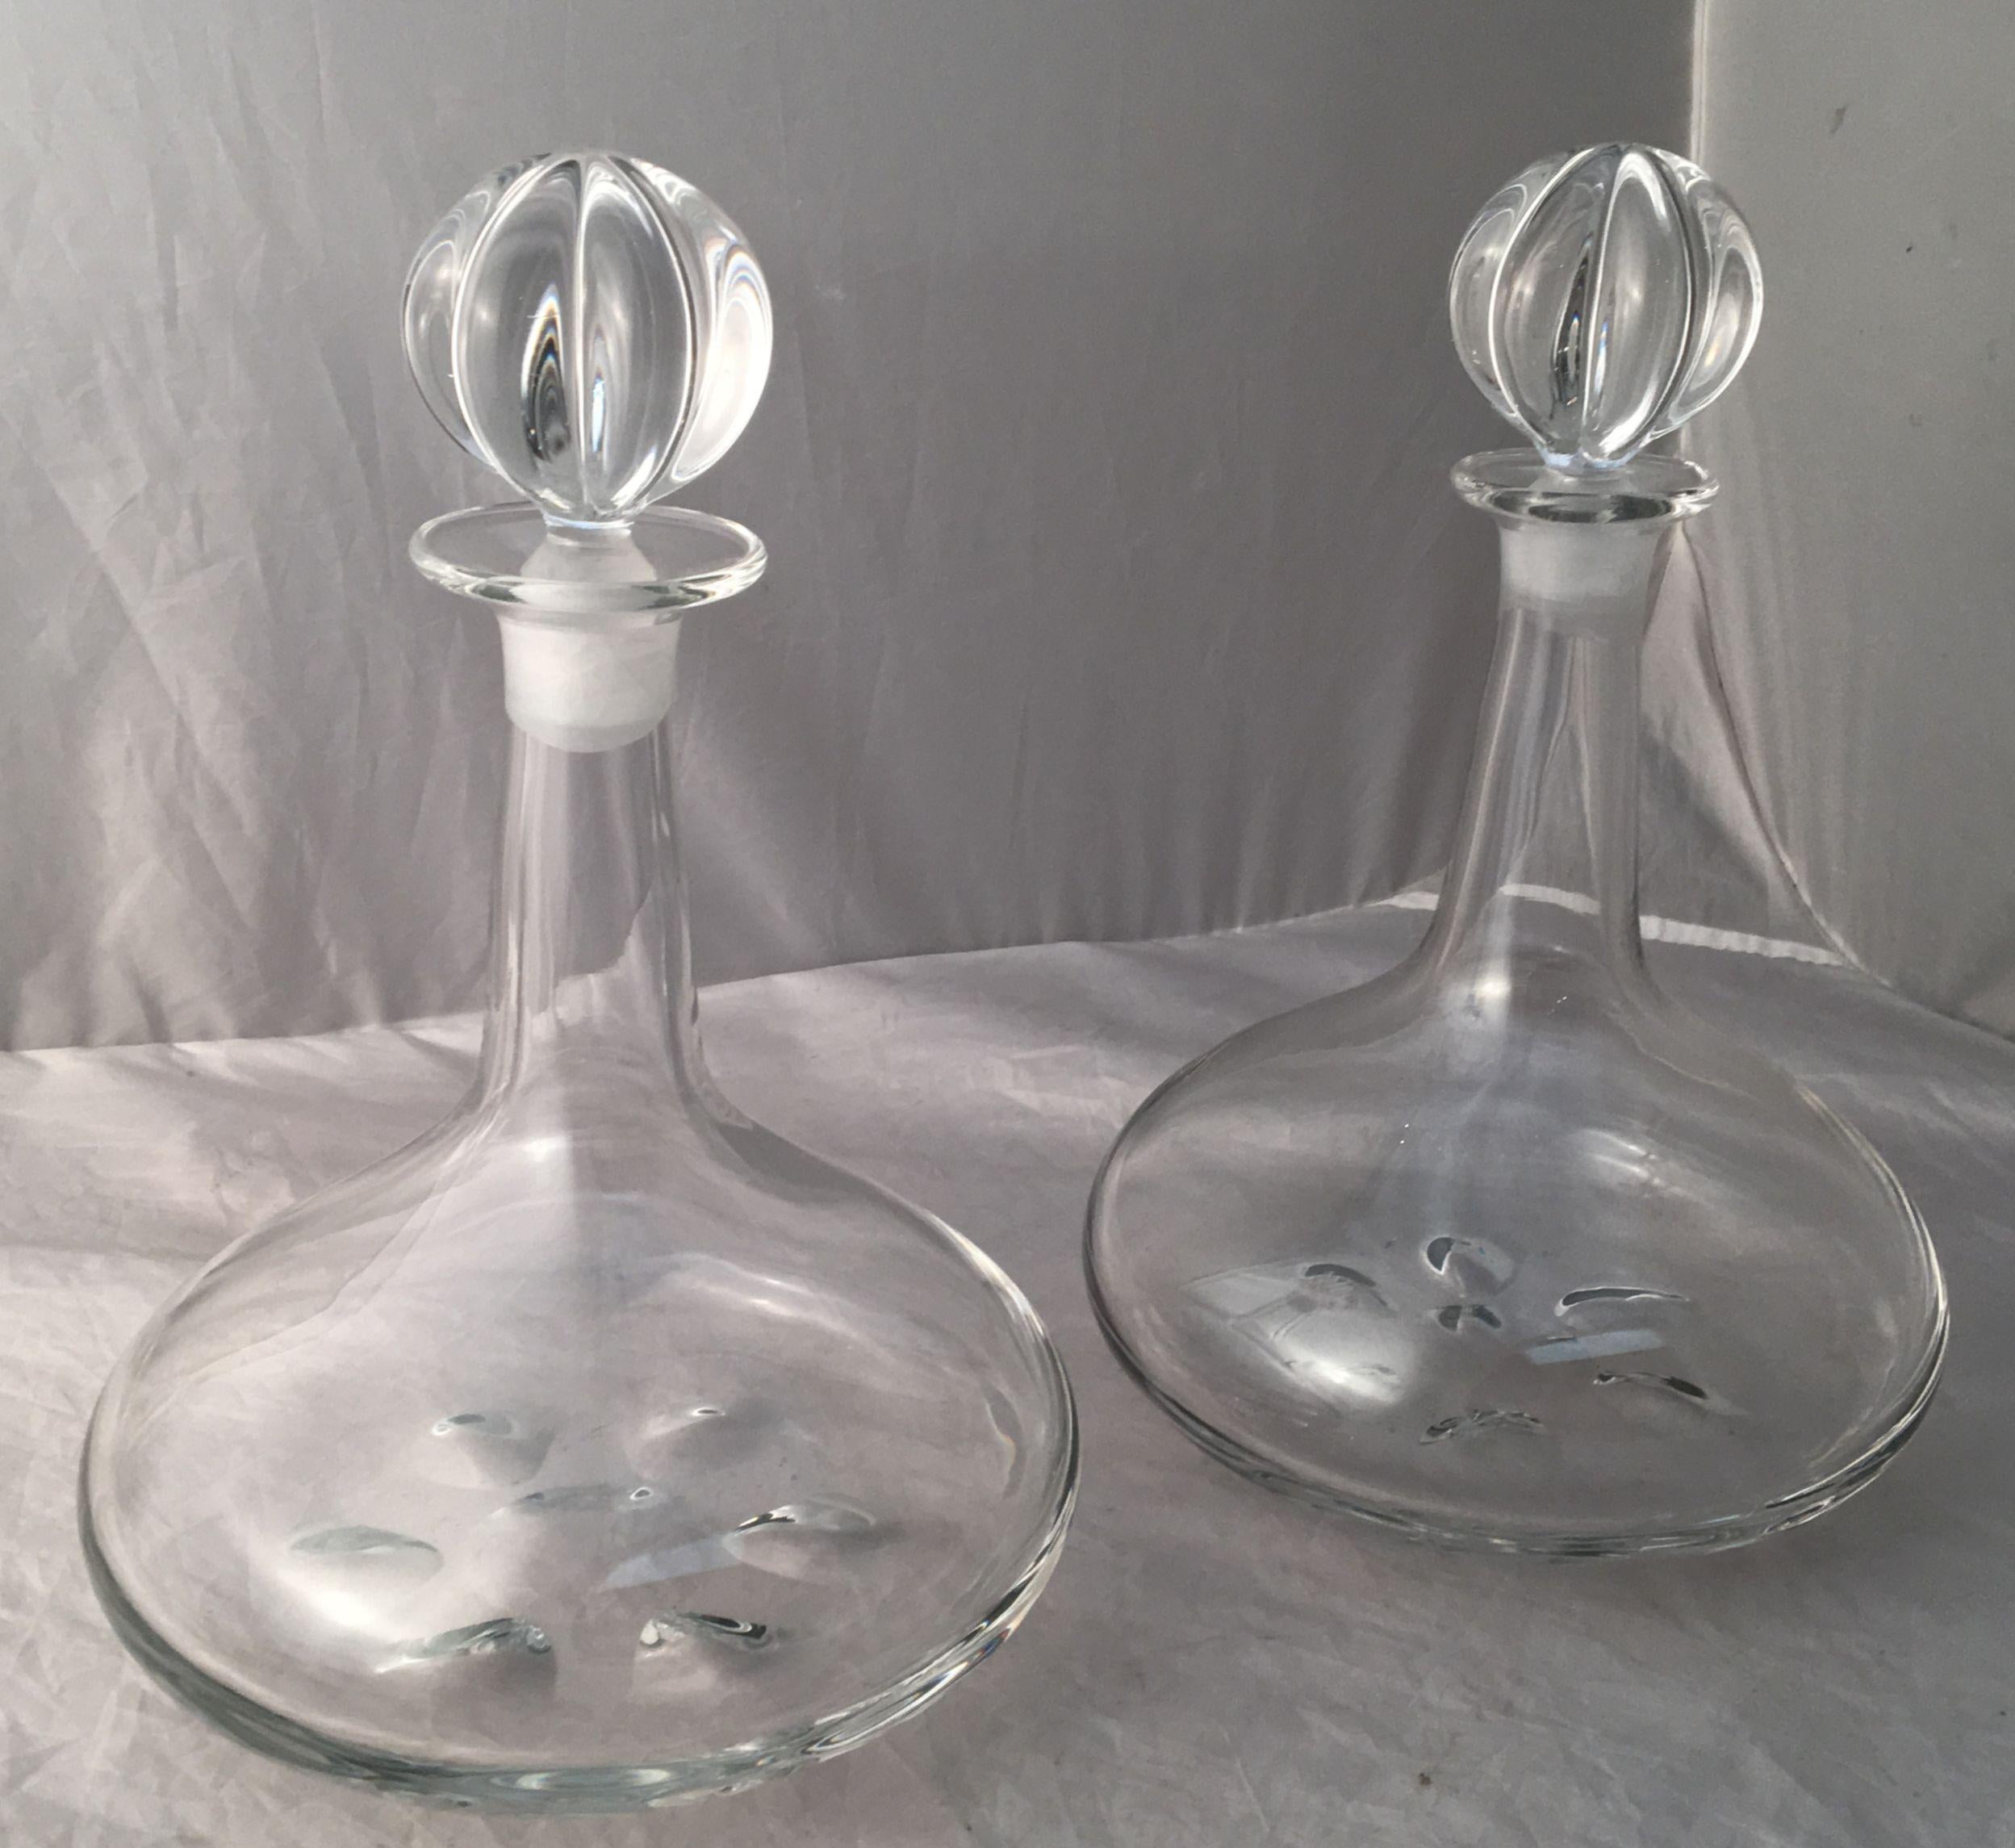 Orrefors Crystal Drinks Decanters by Nils Landberg 'Individually Priced' For Sale 5